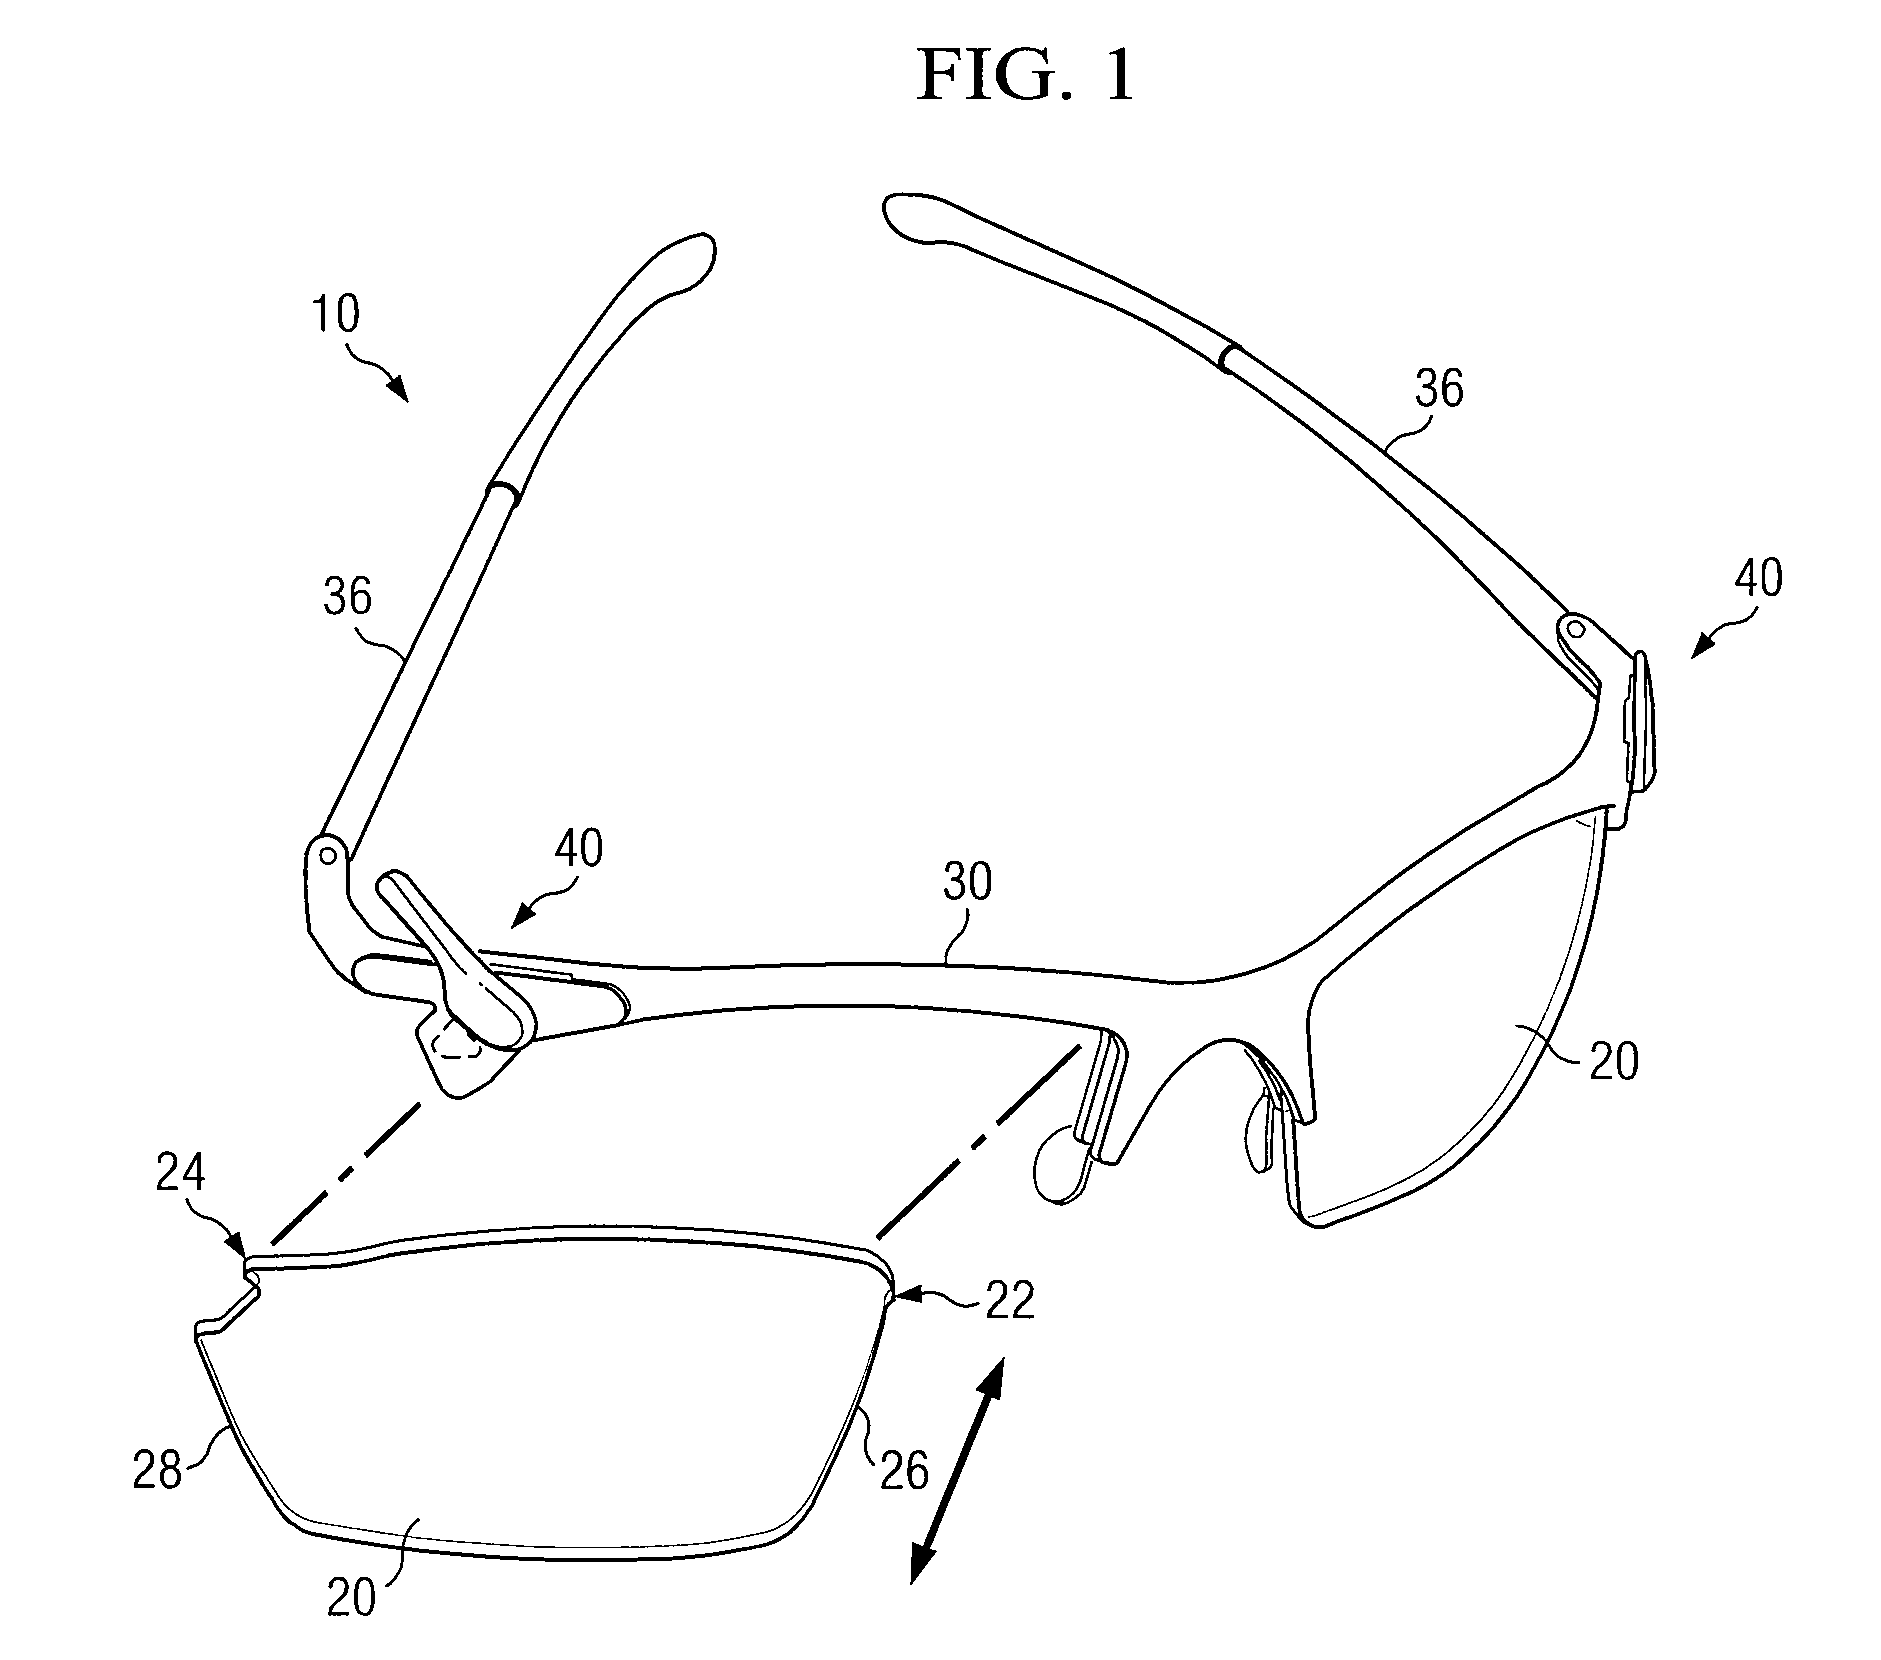 Partially entrapped frame having a removable lens